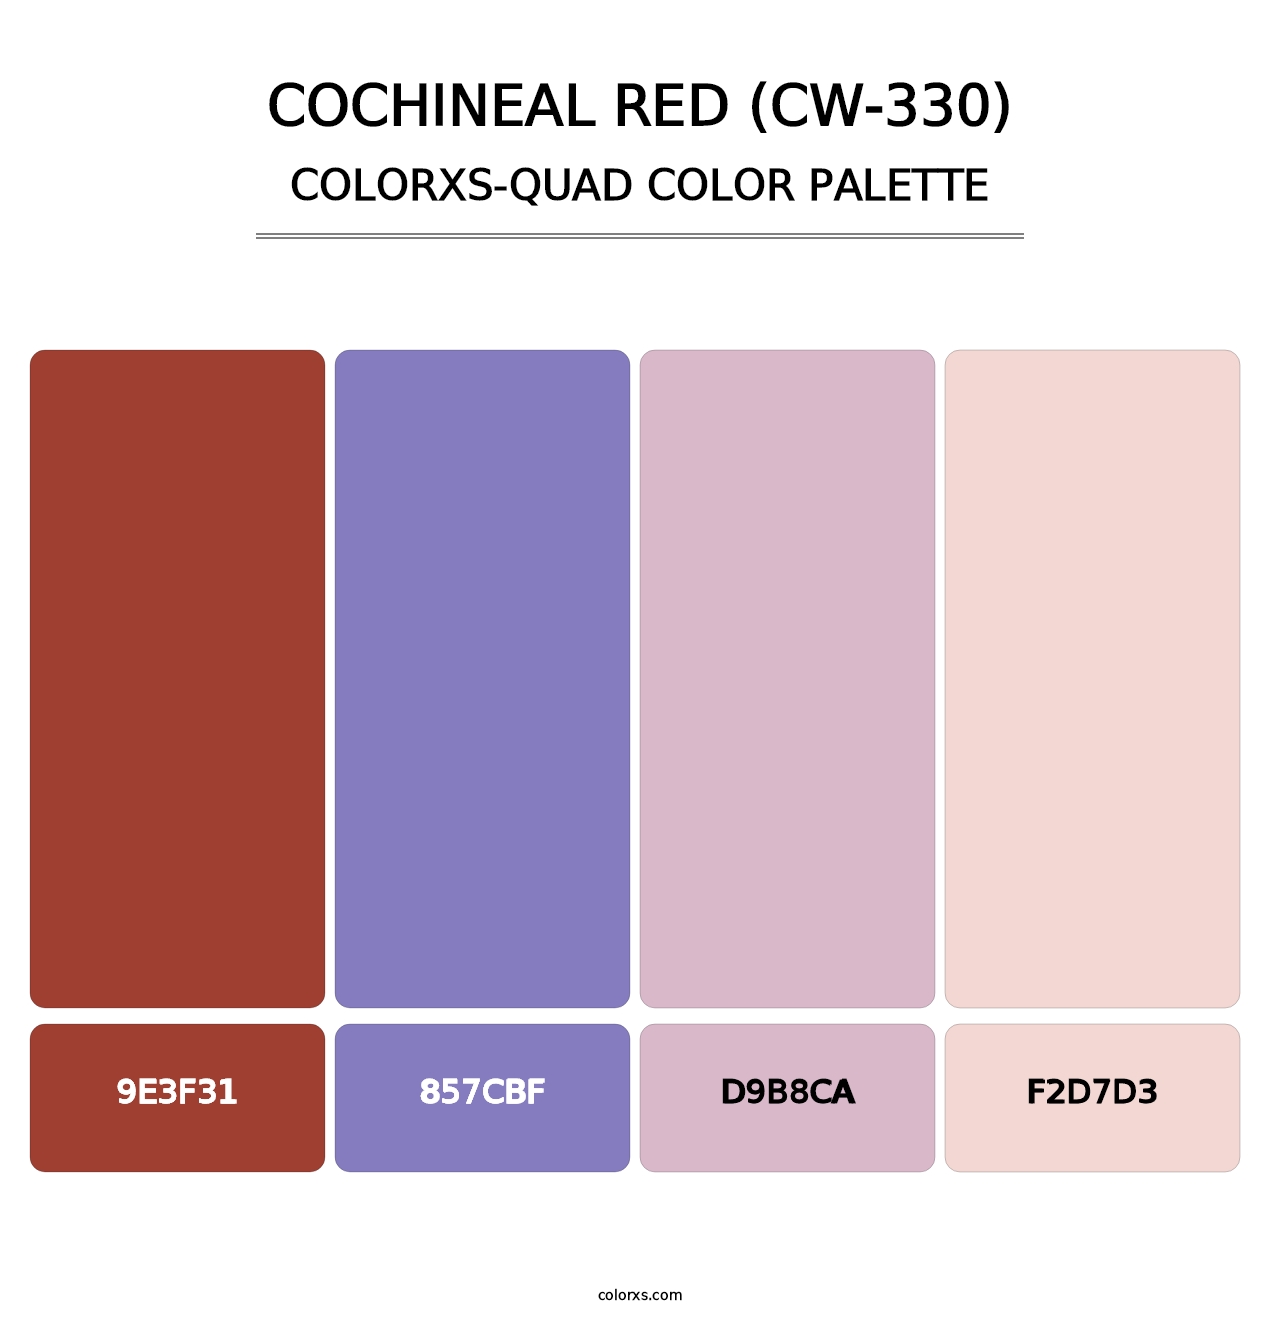 Cochineal Red (CW-330) - Colorxs Quad Palette